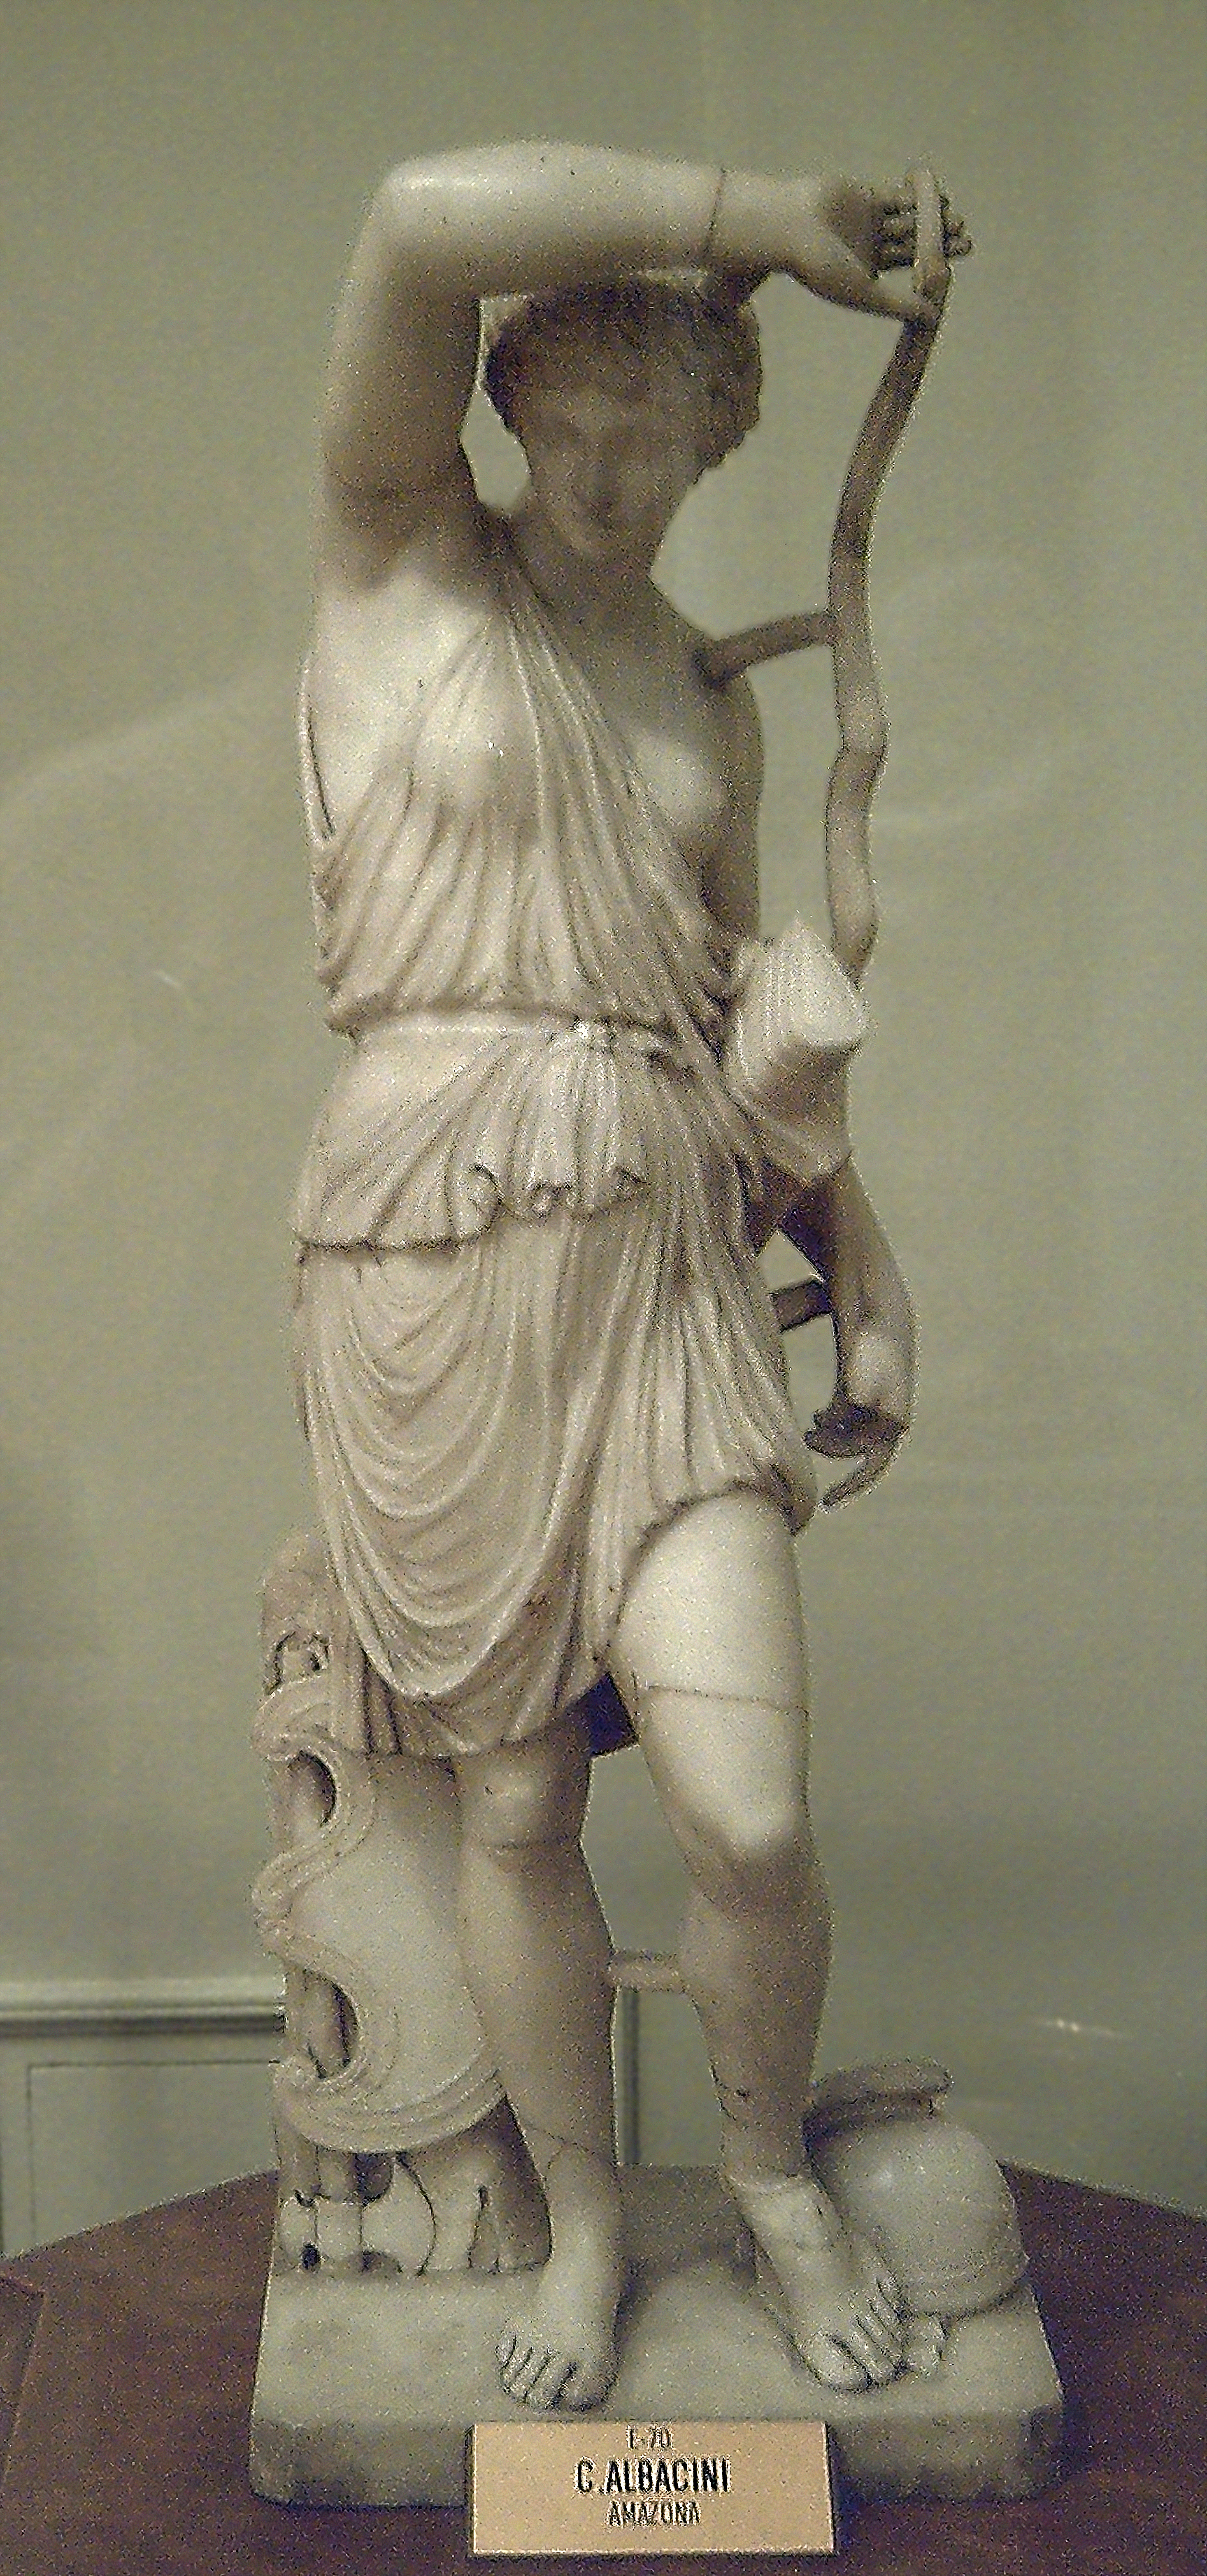 AMAZON, at the Museum of the Royal Academy of Fine Arts of San Fernando, in Madrid (Spain). Sculpted in white marble by Carlo Albacini (active between 1770 and 1807) around 1780. Dimensions: 71 x 26 x 23 cm. It's a copy of the Greek original (440–430 BC) at the Capitoline Museums (Rome, Italy).